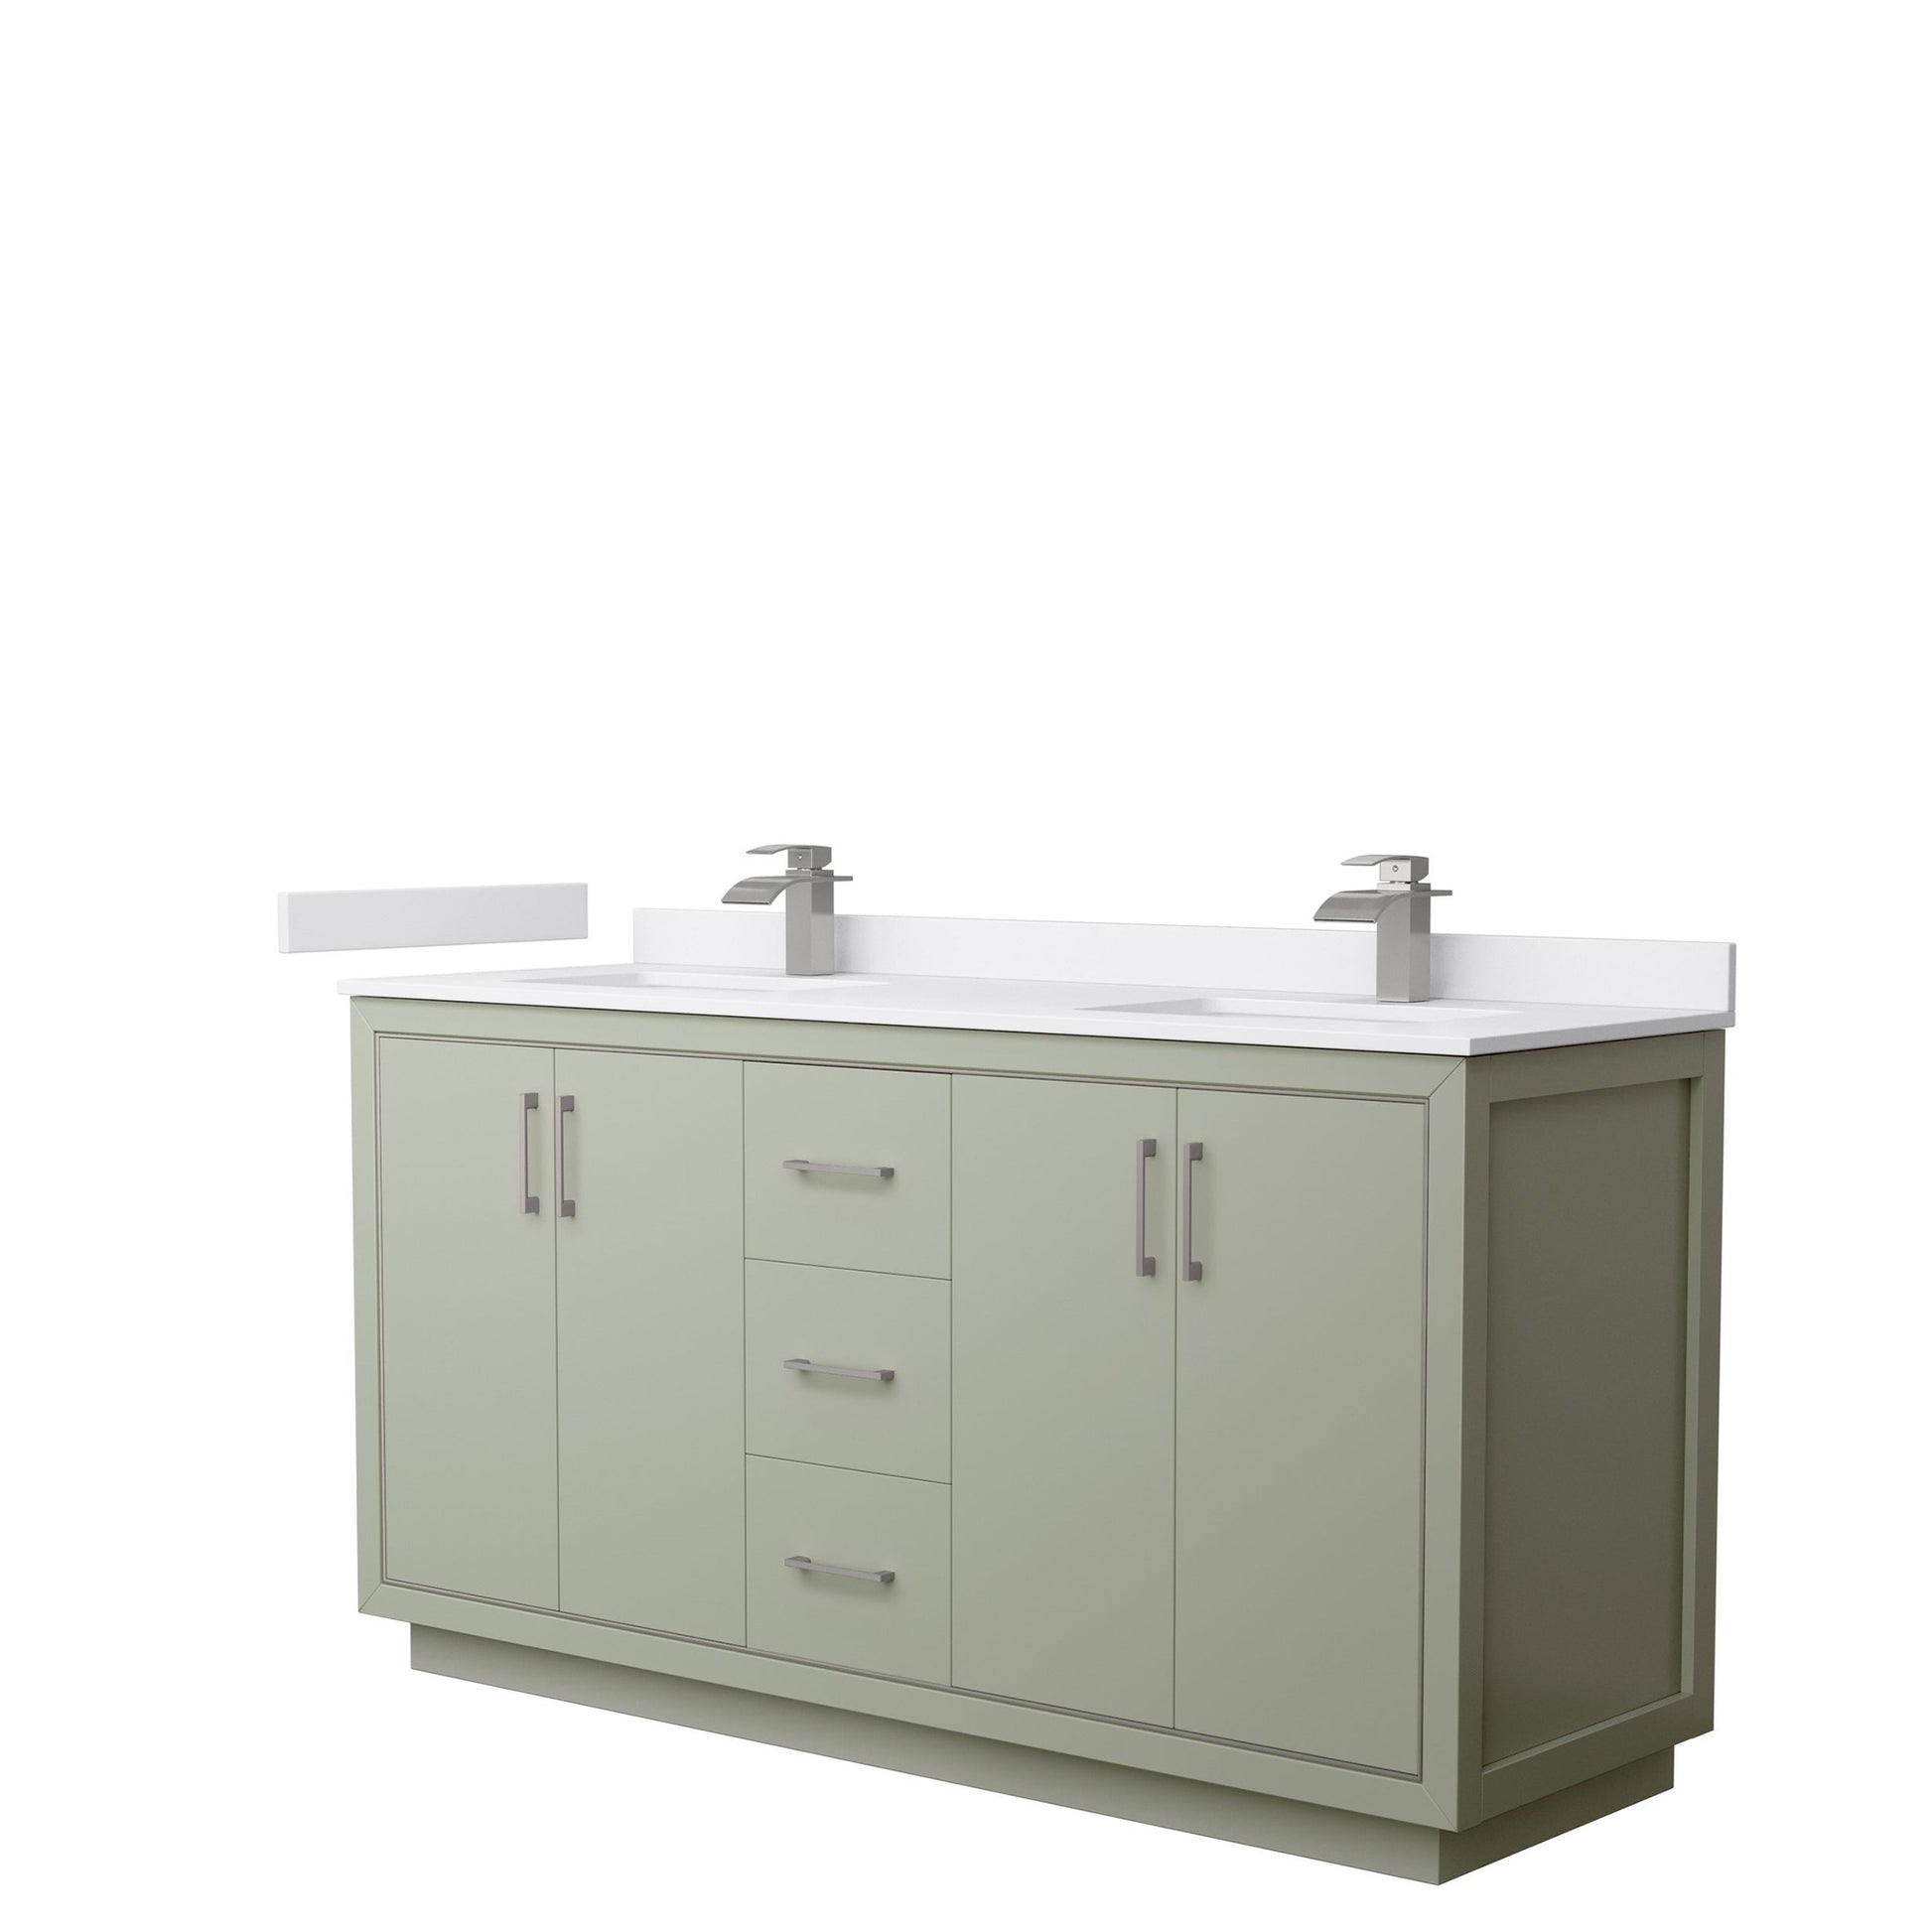 Wyndham Collection Icon 66" Double Bathroom Vanity in Light Green, White Cultured Marble Countertop, Undermount Square Sinks, Brushed Nickel Trim